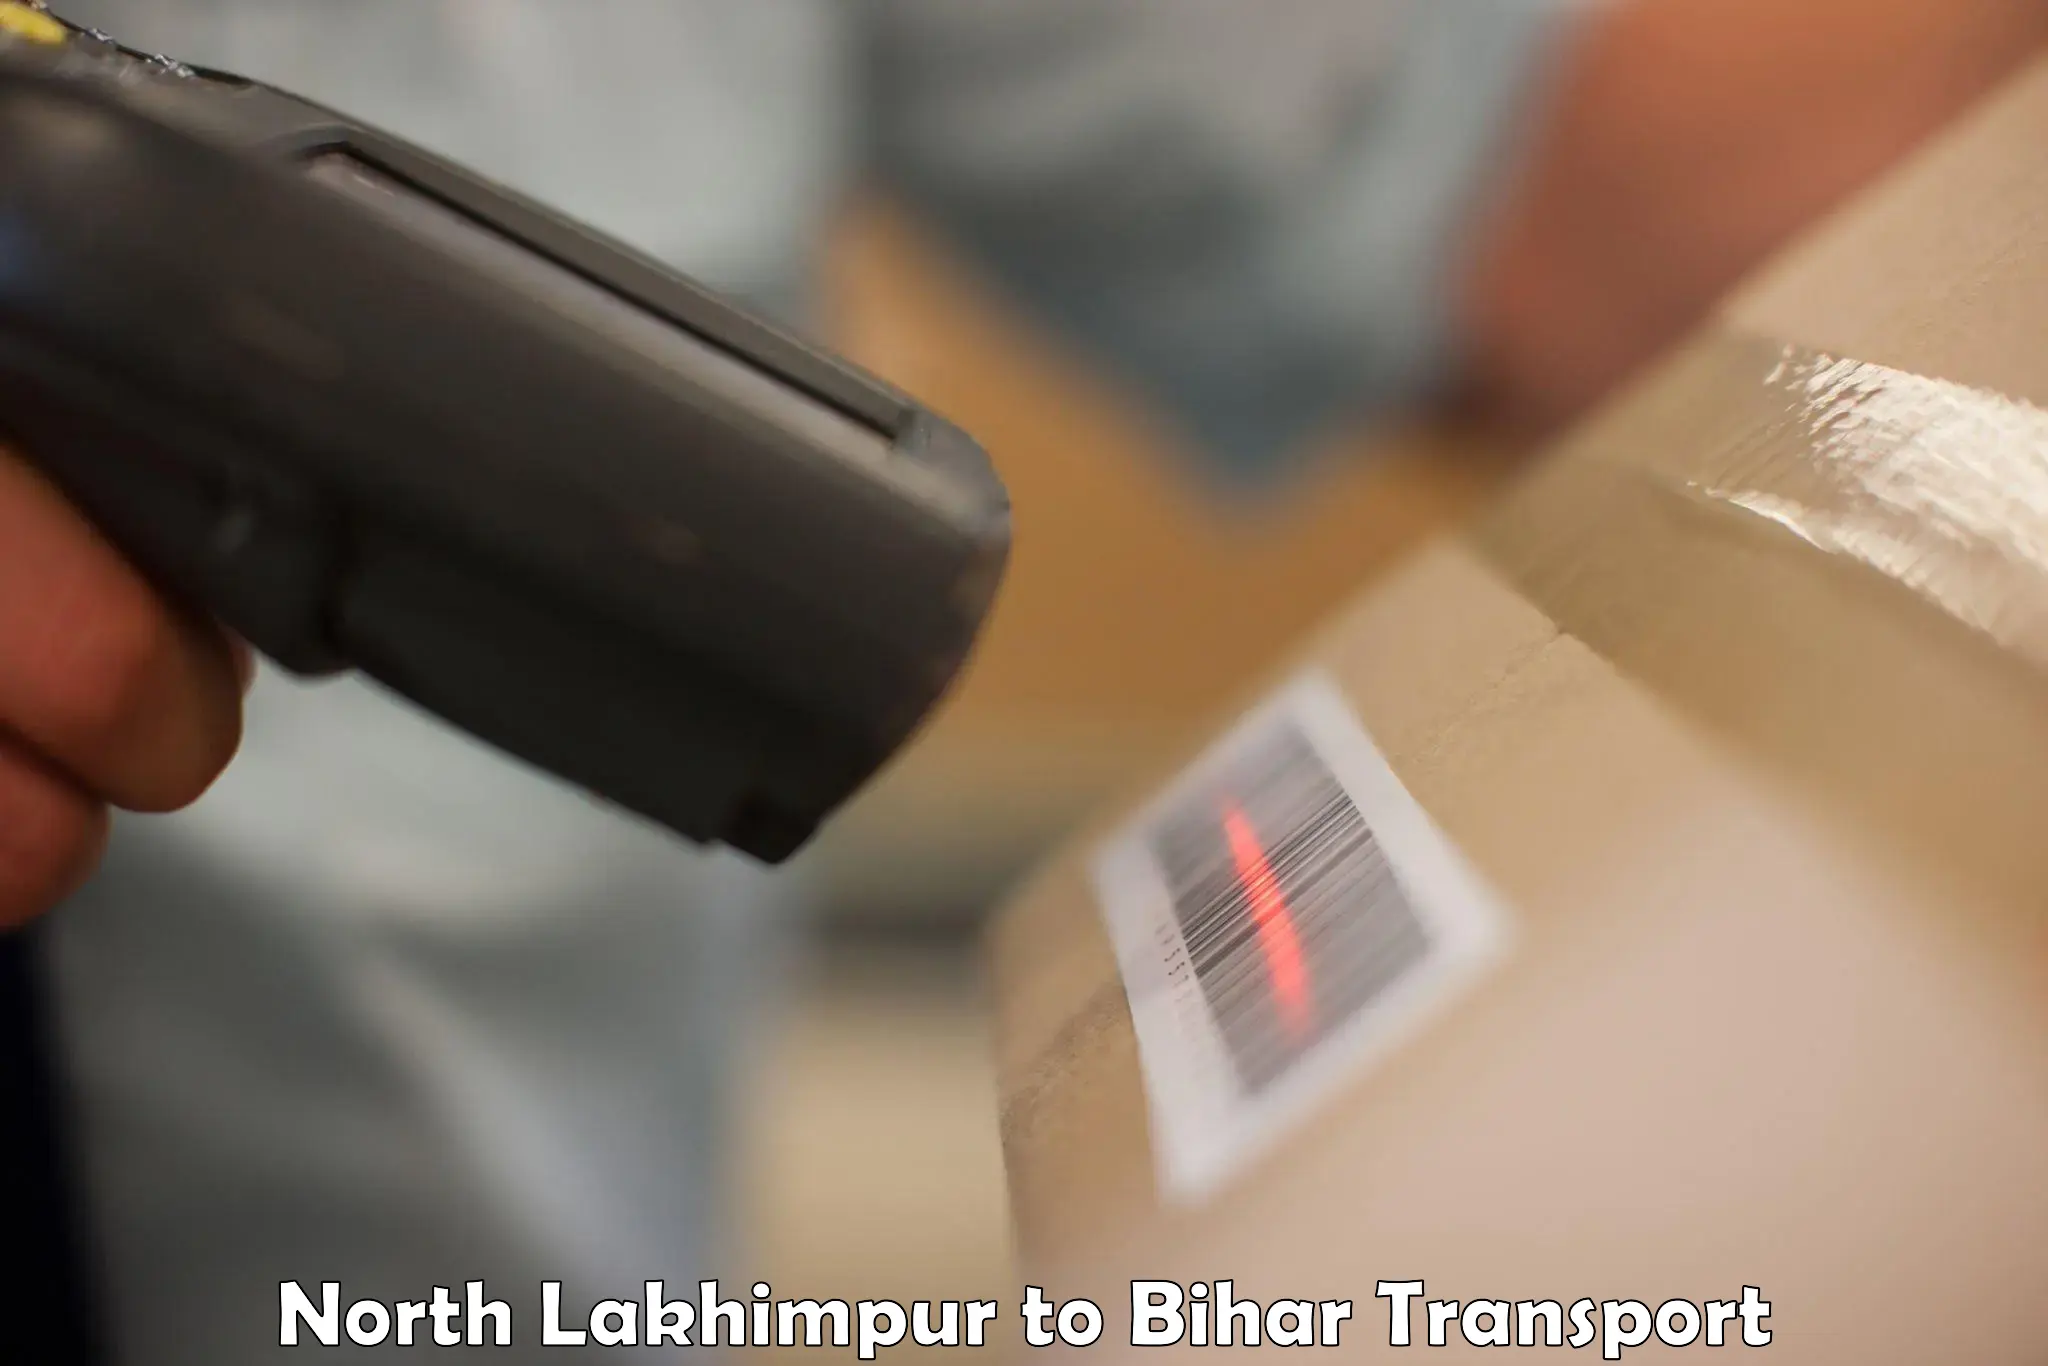 Transport shared services North Lakhimpur to Sharfuddinpur